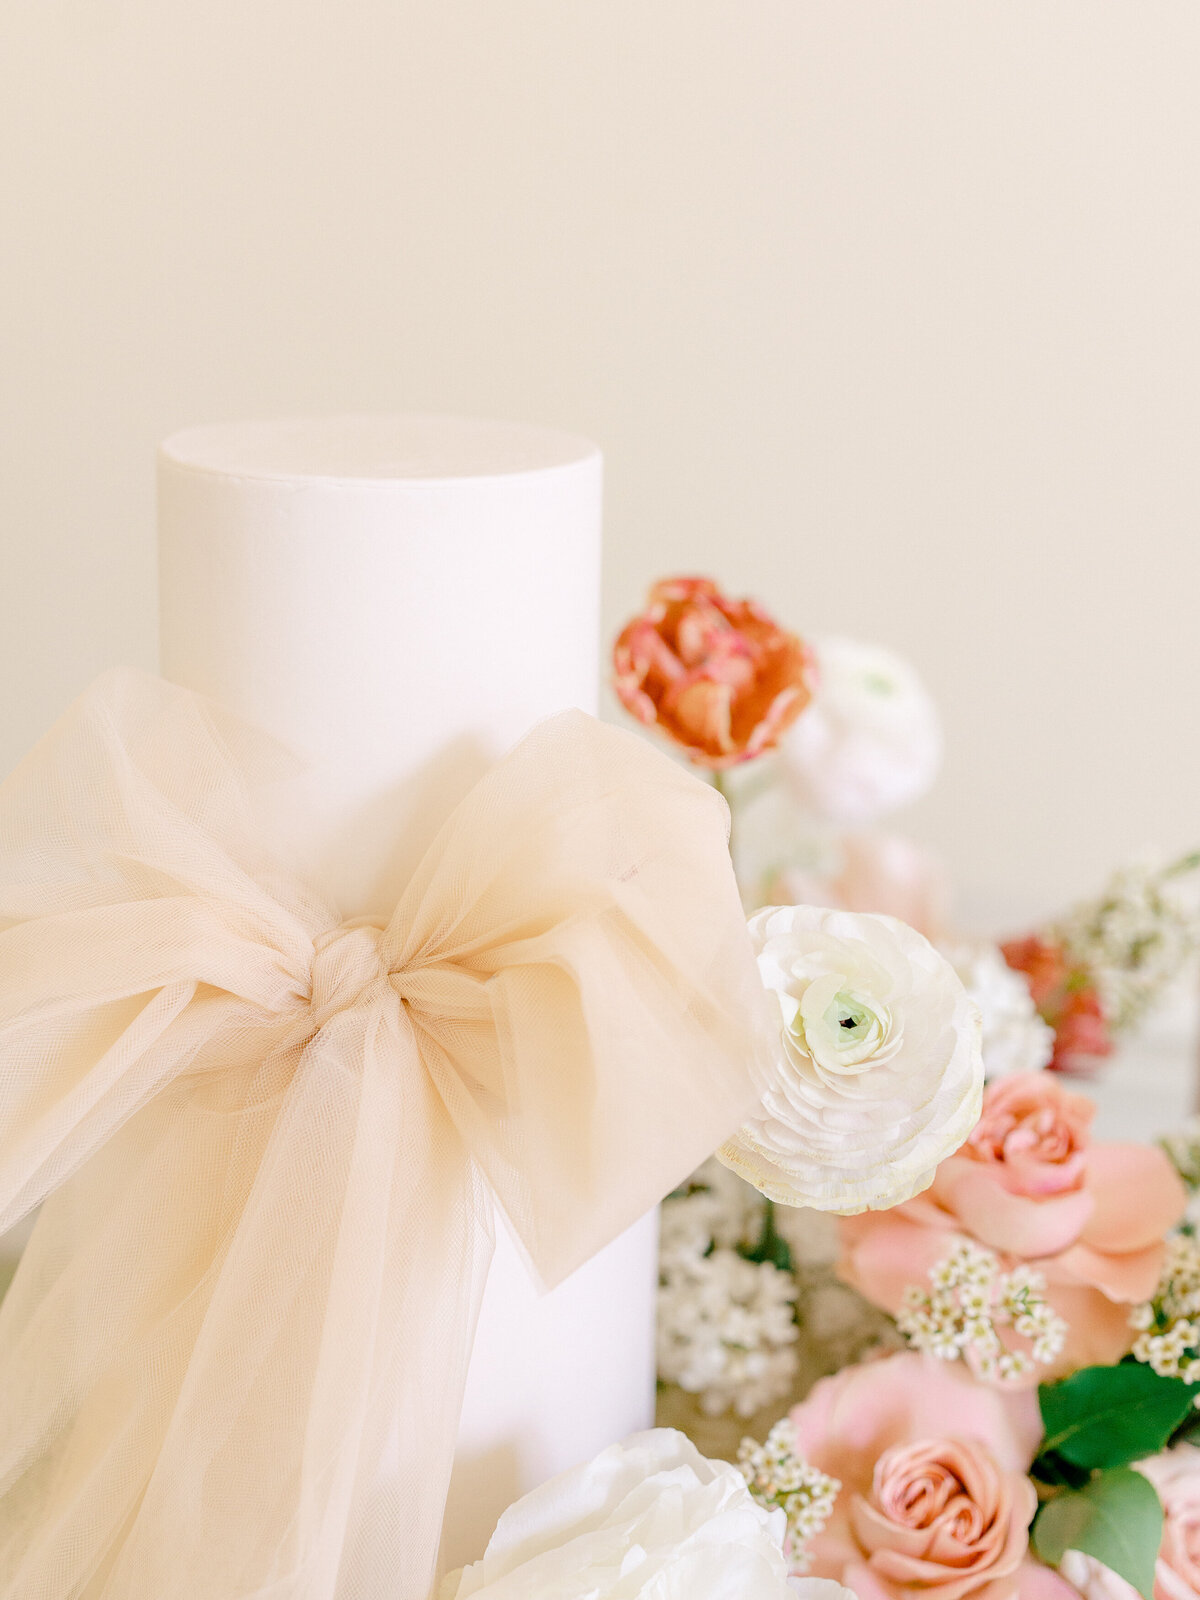 Close up of a tied bow next to a pink and white floral arrangement